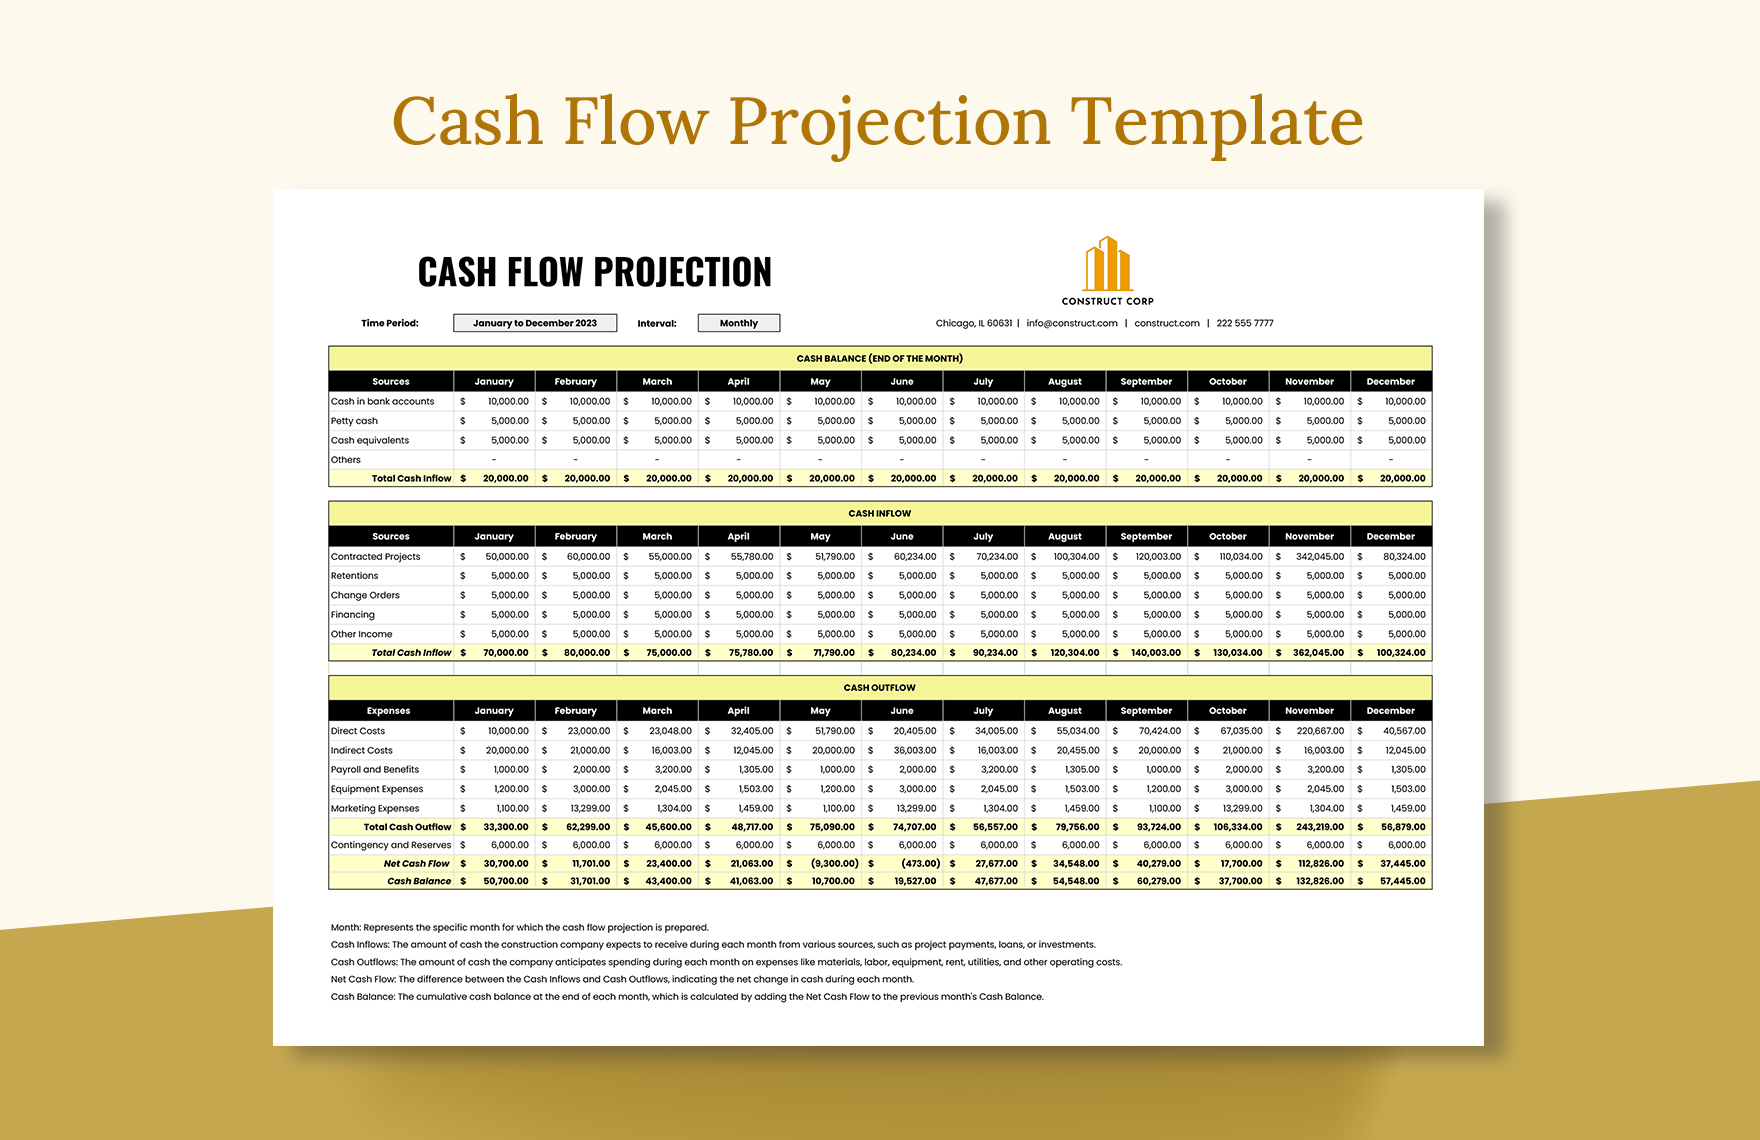 Cash Flow Projection Template in Excel, Google Sheets